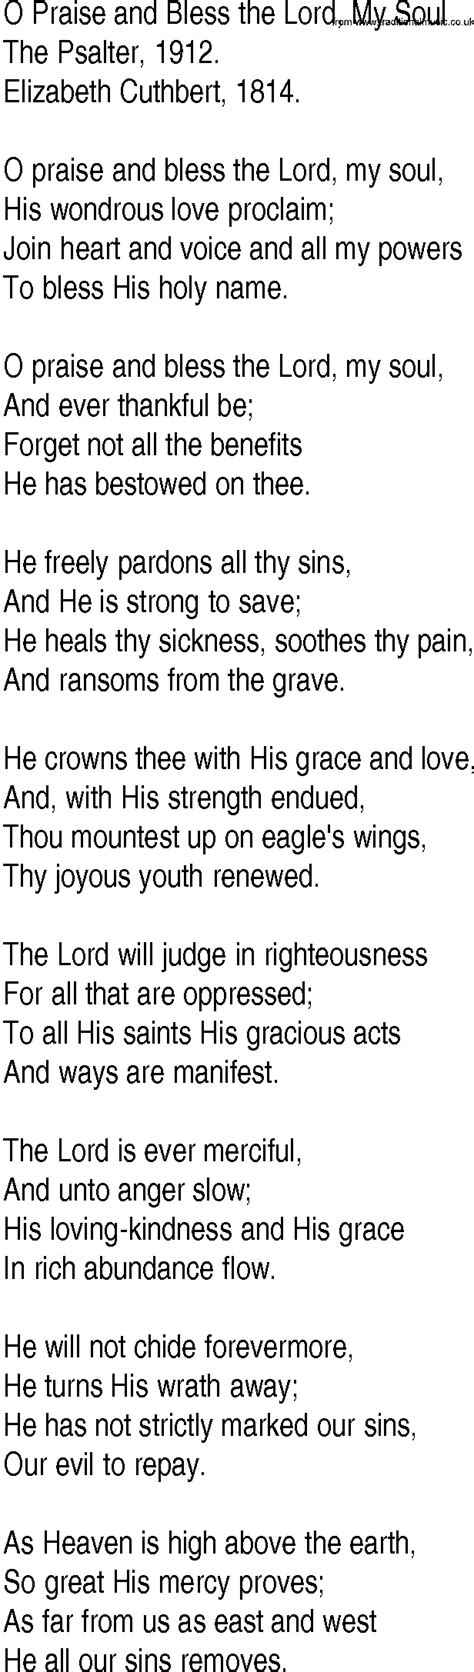 Hymn And Gospel Song Lyrics For O Praise And Bless The Lord My Soul By